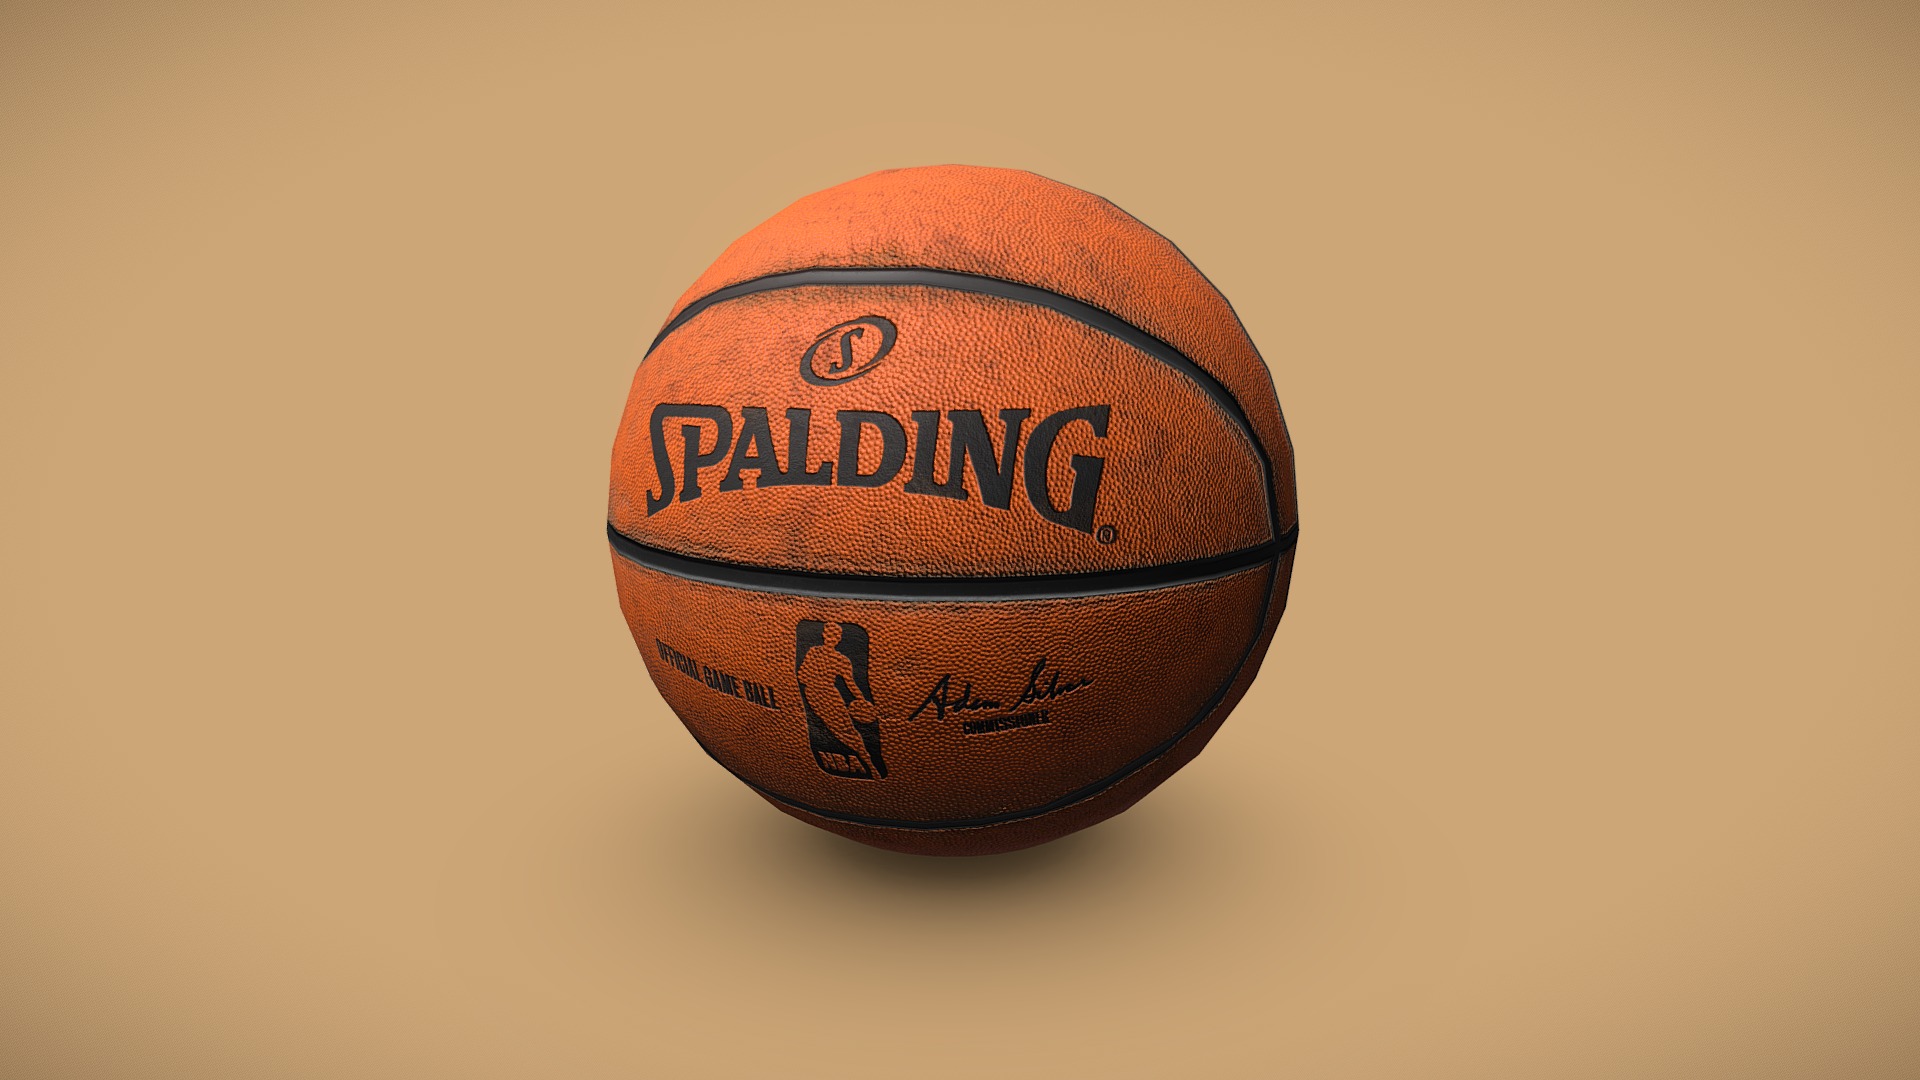 3D model Low poly Basketball Spalding - This is a 3D model of the Low poly Basketball Spalding. The 3D model is about a basketball with a red and white ball on it.